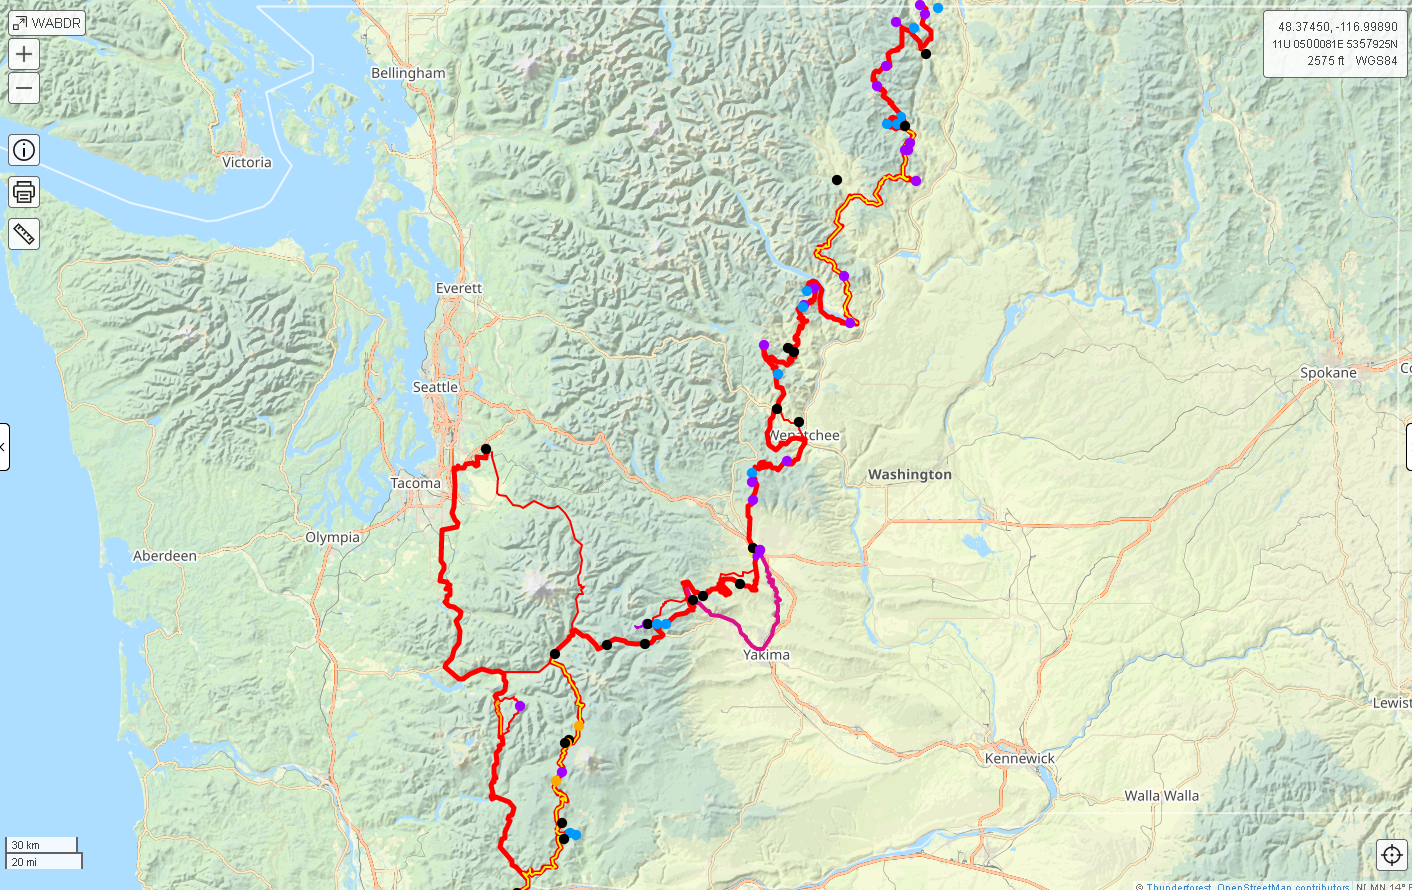 The route as-used. This map has some extra tracks on it because I had to detour on my way home to avoid wildfires in Packwood. The dots are campsites, resupply spots, or attractions.